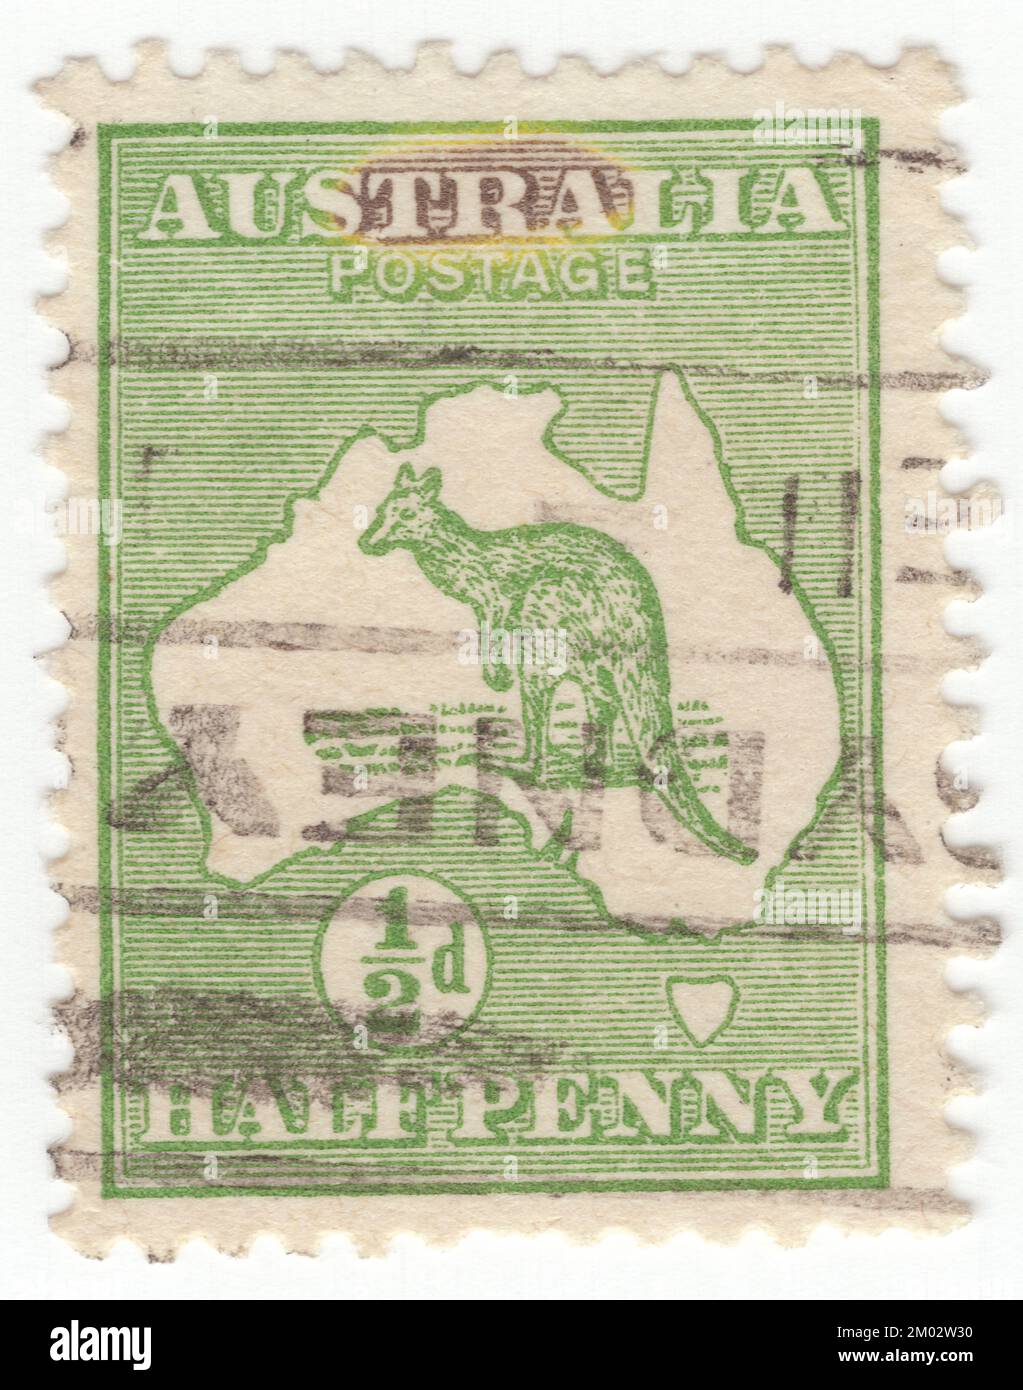 AUSTRALIA — 1913: An ½ pence green postage stamp depicting Kangaroo and Map of Australia. Australia is the oldest, flattest, and driest inhabited continent, with the least fertile soils. It is a megadiverse country, and its size gives it a wide variety of landscapes and climates, with deserts in the centre, tropical rainforests in the north-east, and mountain ranges in the south-east. The kangaroo is a recognizable symbol of Australia. First Australian postage stamps issue. The kangaroo and emu feature on the Australian coat of arms Stock Photo